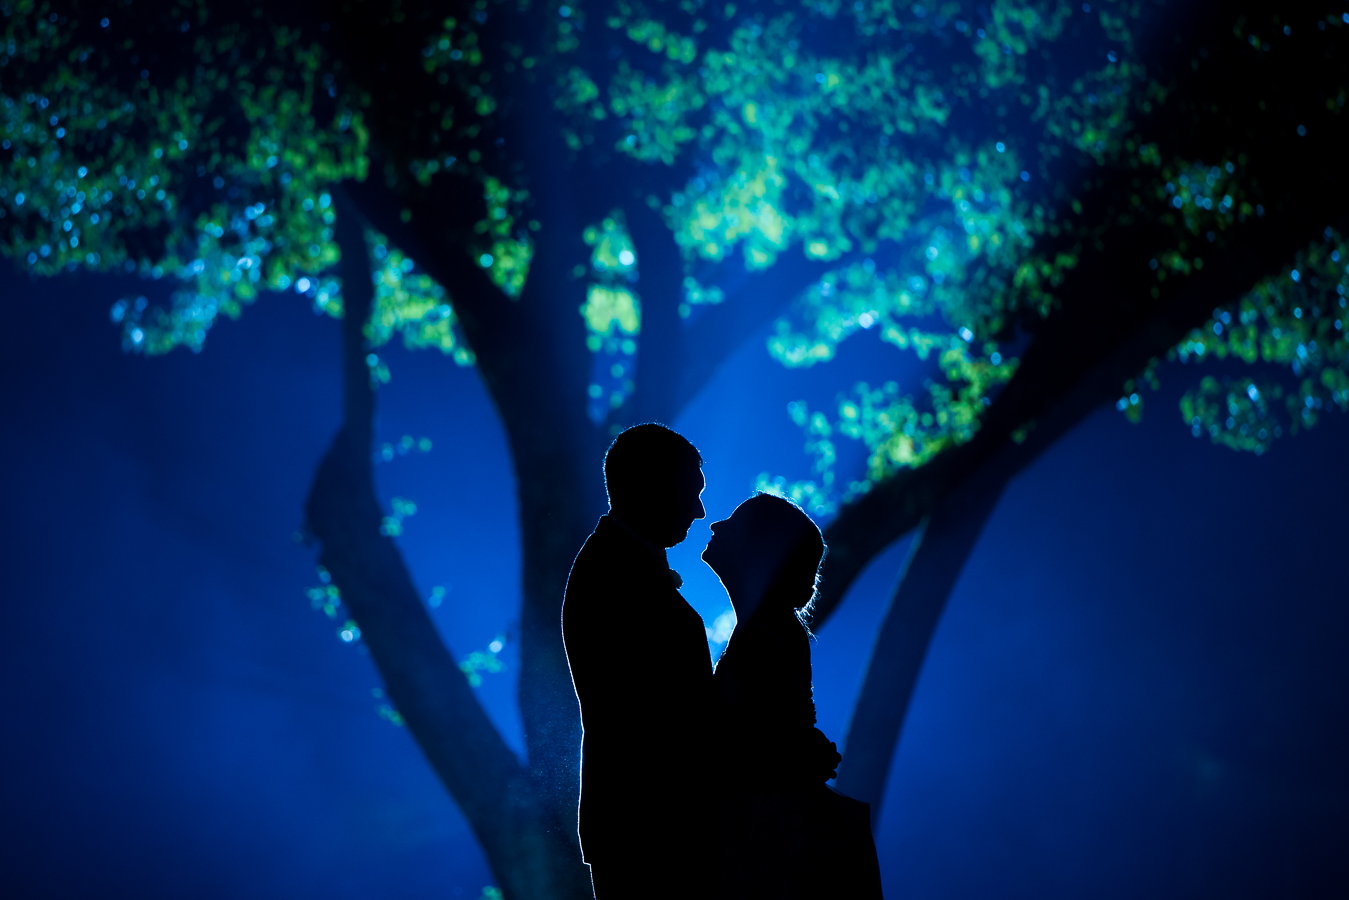 nj wedding photographer, lisa rhinehart, captures this close up silhouette of the bride and groom as they look at each other surrounded by the smoke from the firework display 